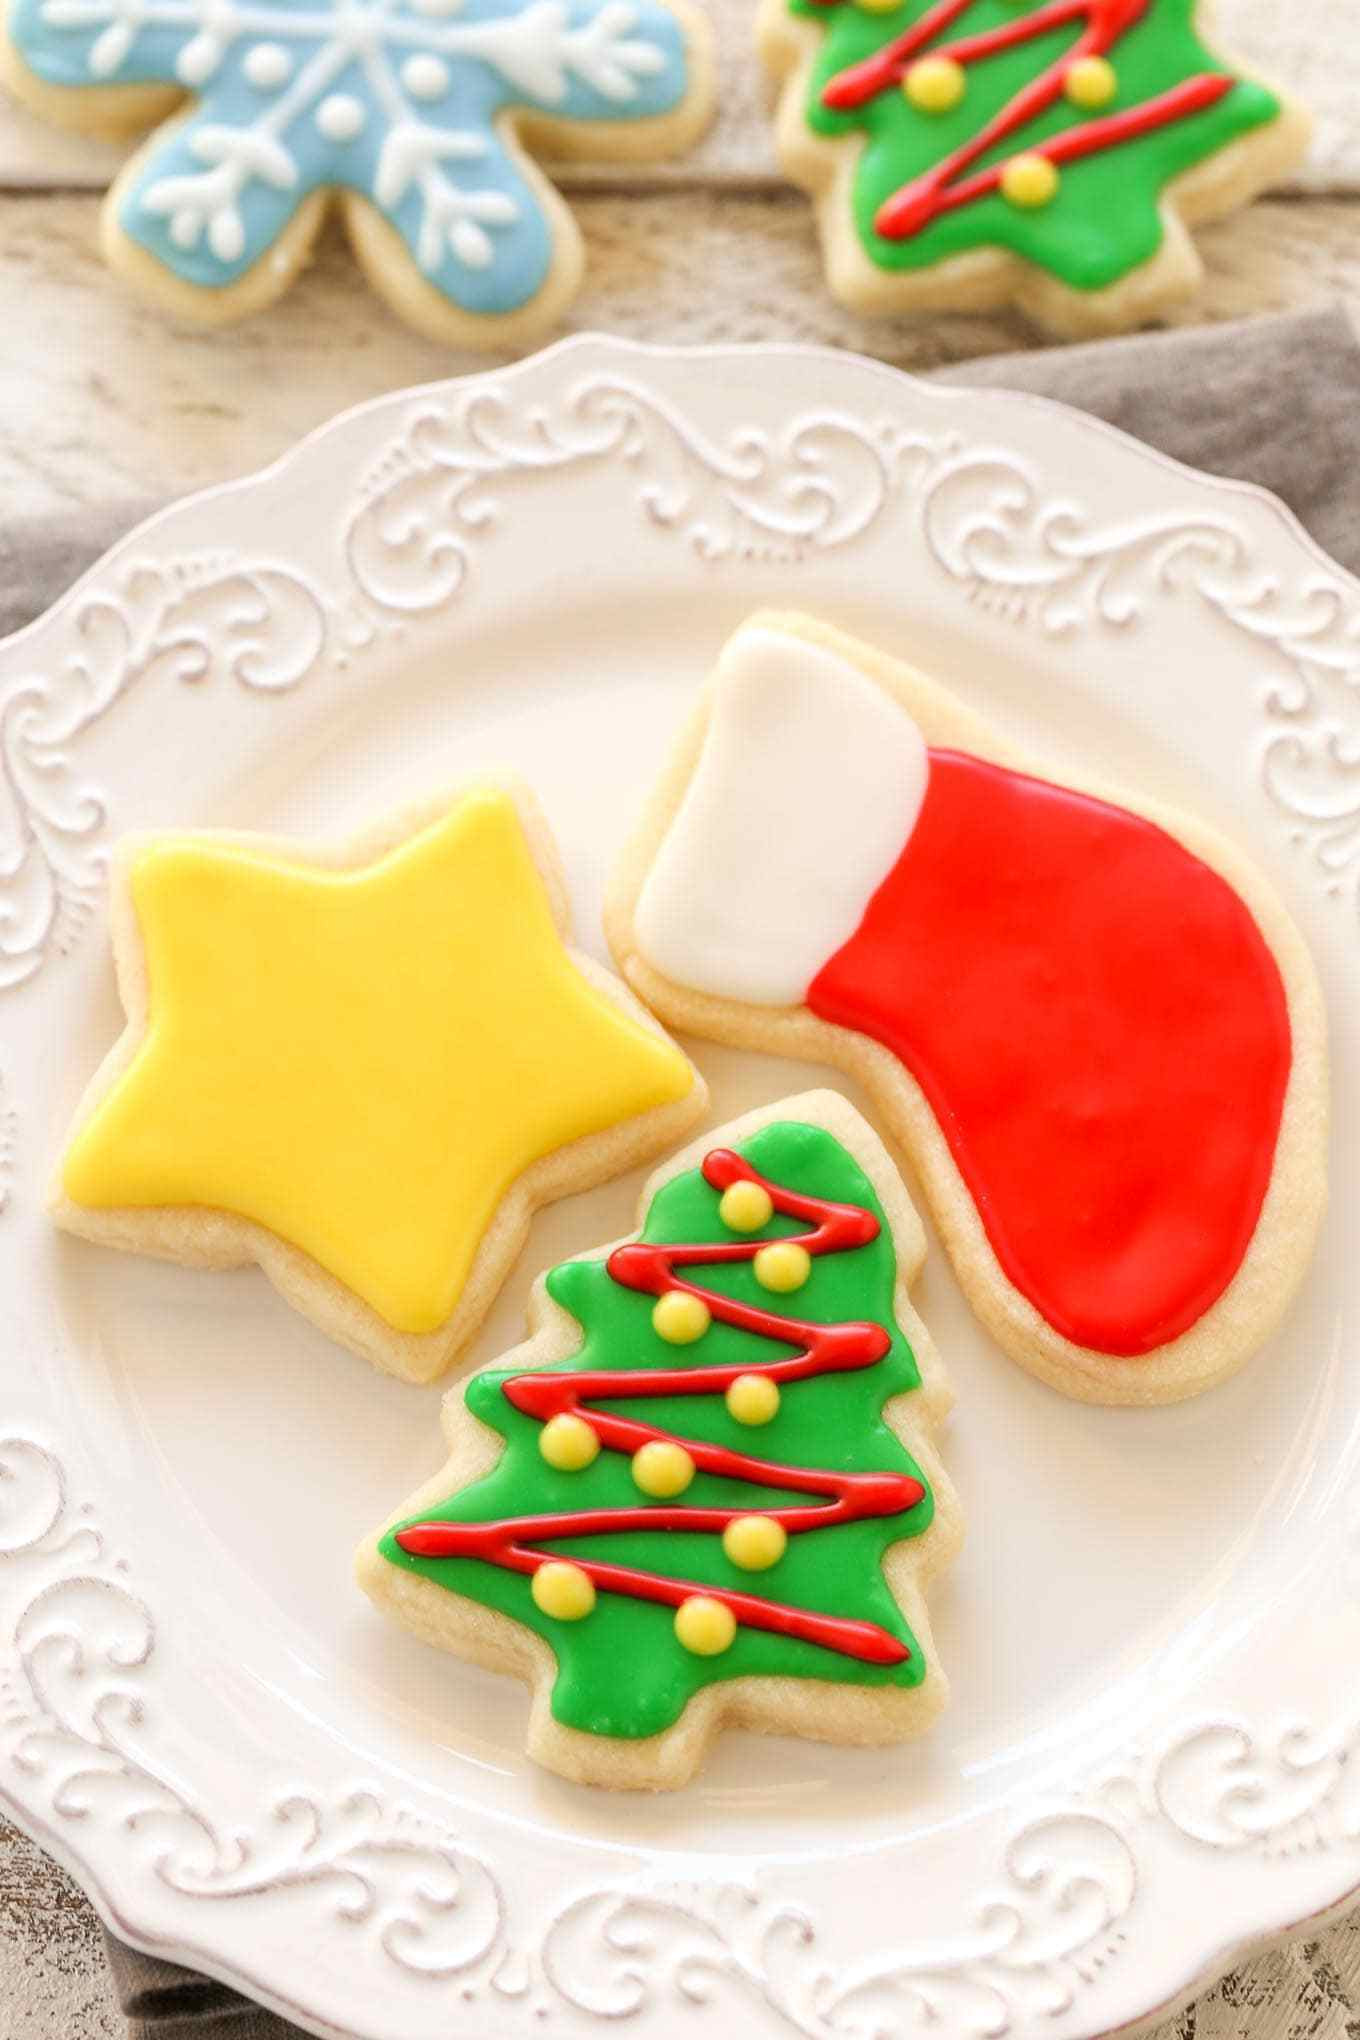 Rolled Christmas Cookies
 Soft Christmas Cut Out Sugar Cookies Live Well Bake ten